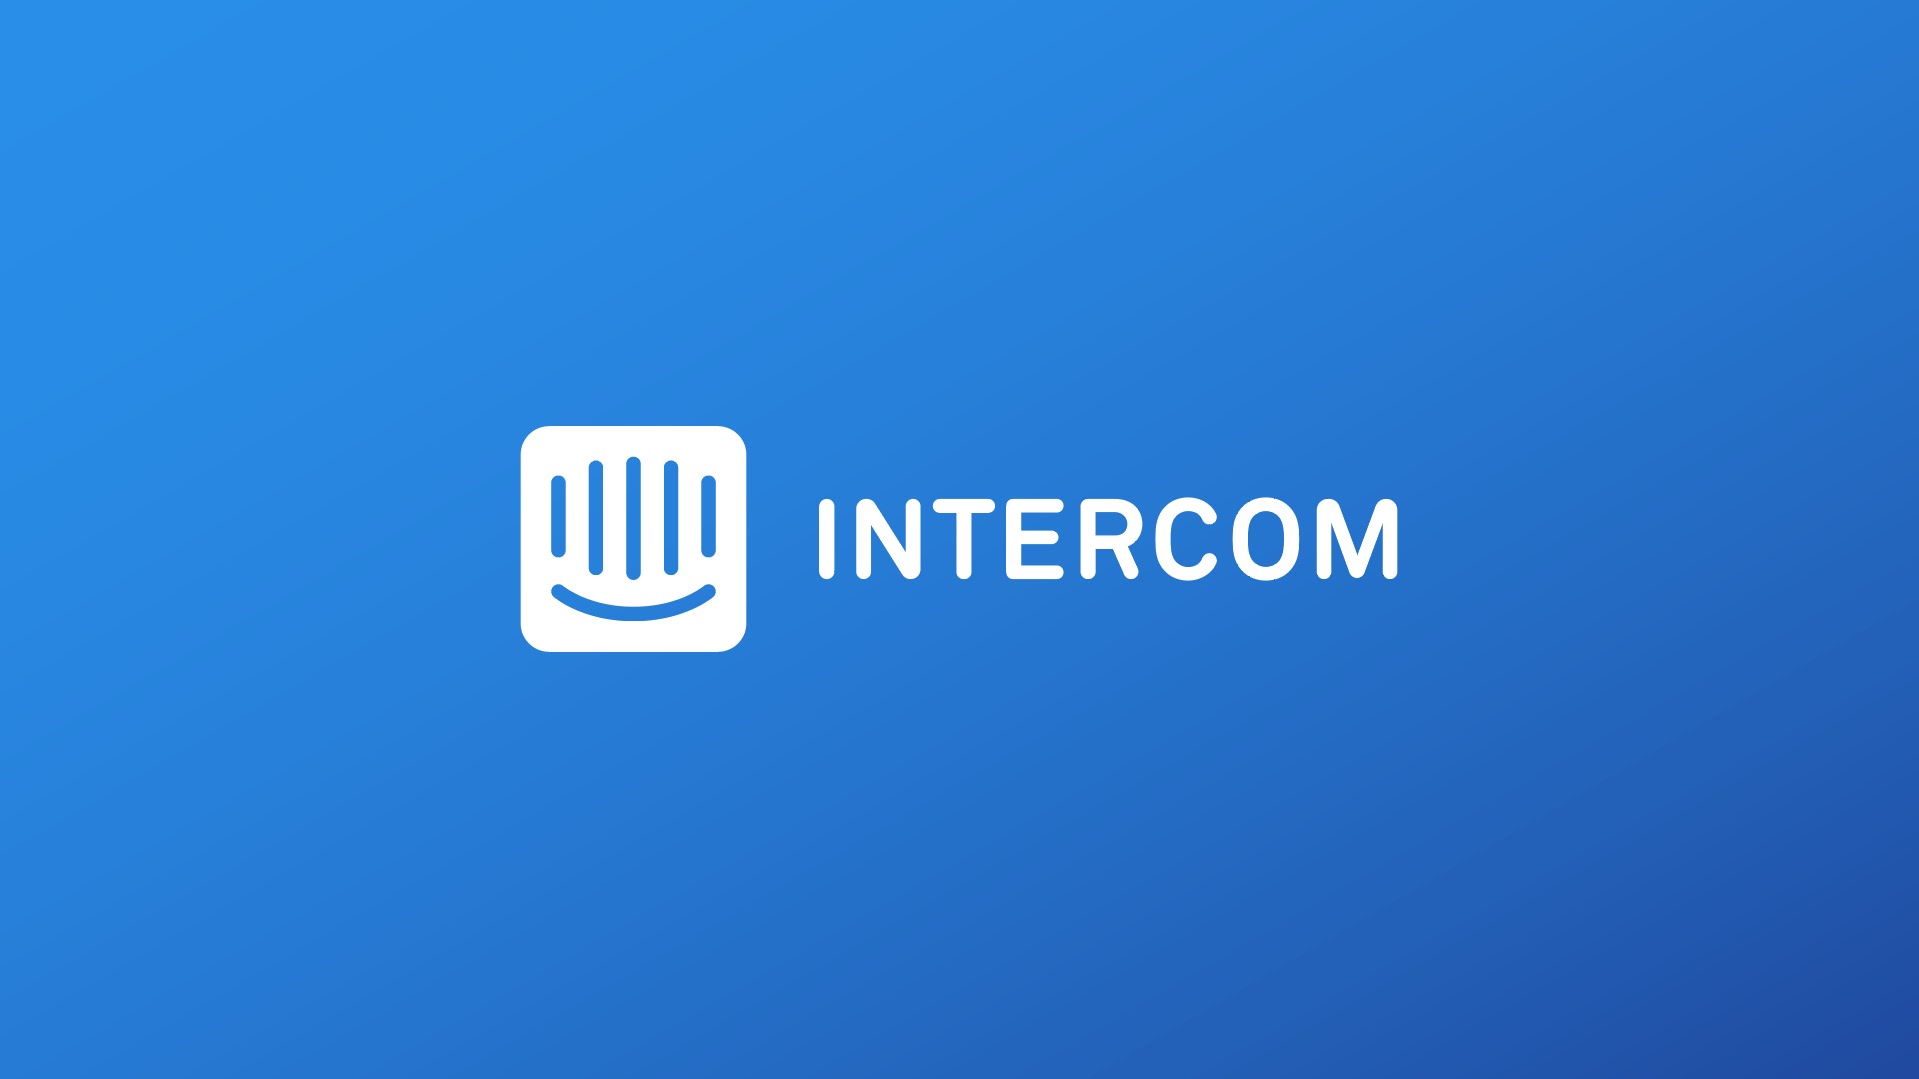 image of intercom which is used to engage, educate, and respond to customers to help you reduce churn from all angles